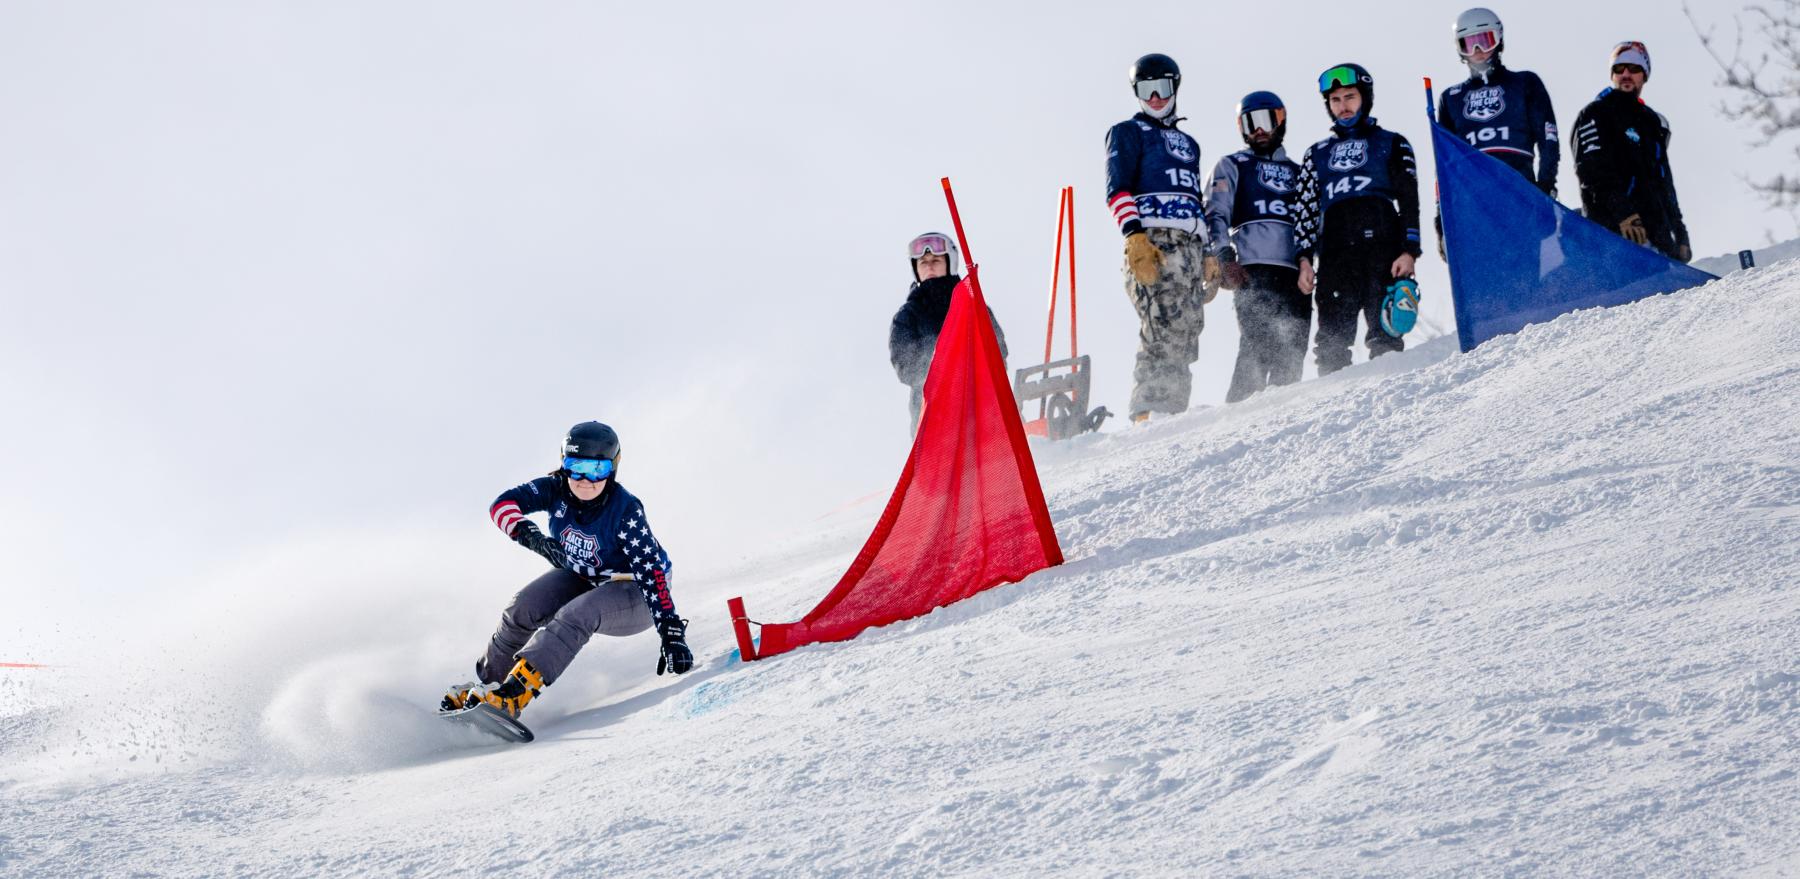 A photo of Mika Fizuka snowboarding down a snowy hill past a red flag while six people watch from above her